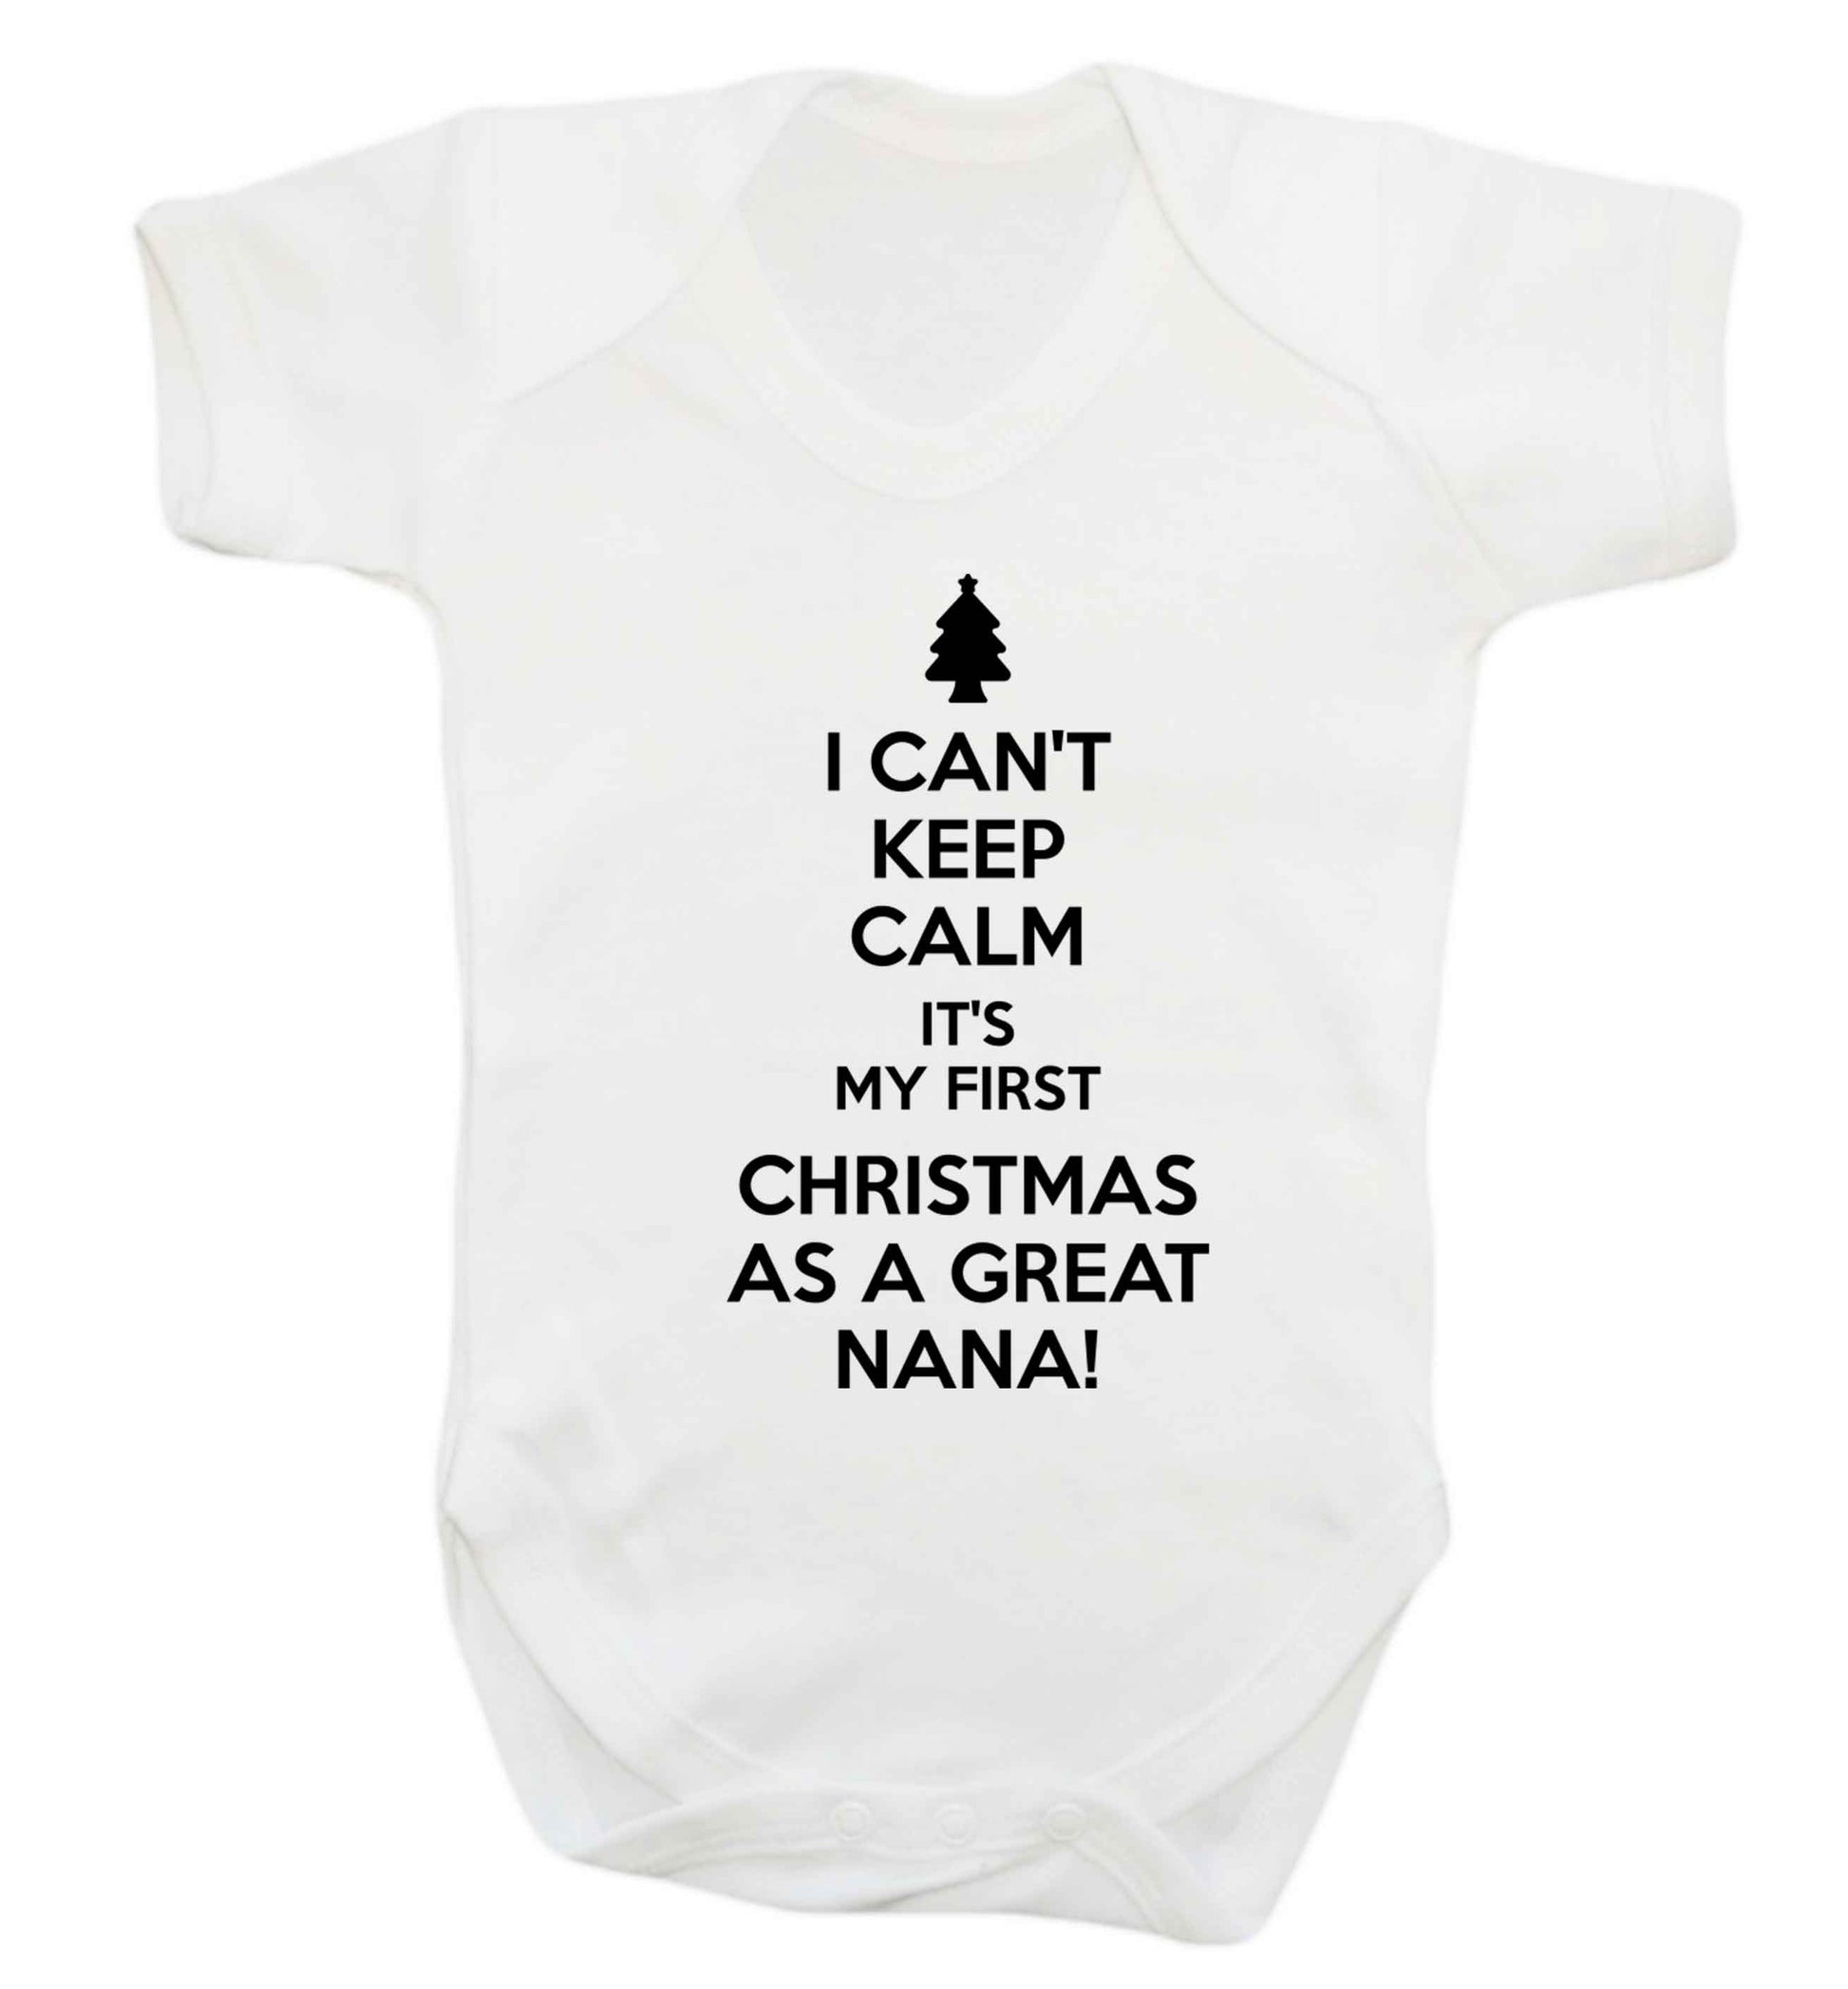 I can't keep calm it's my first Christmas as a great nana! Baby Vest white 18-24 months